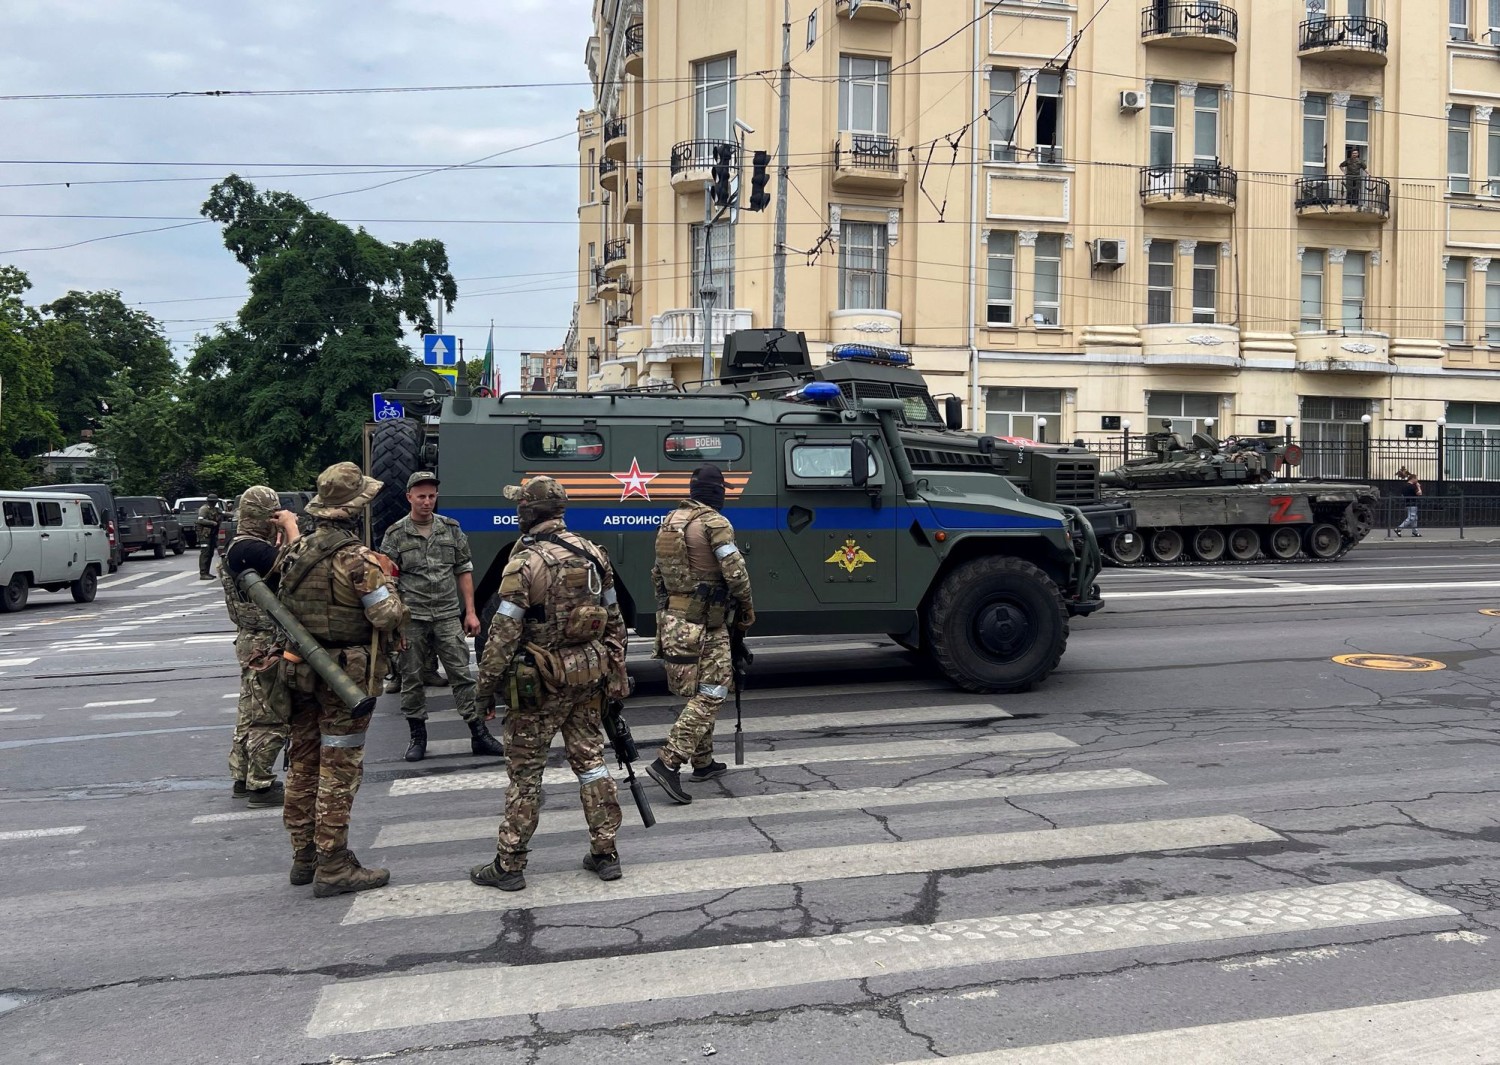 Wagner fighters on Saturday spoke with a Russian service member near the headquarters of the Southern Military District in Rostov. STRINGER/REUTERS